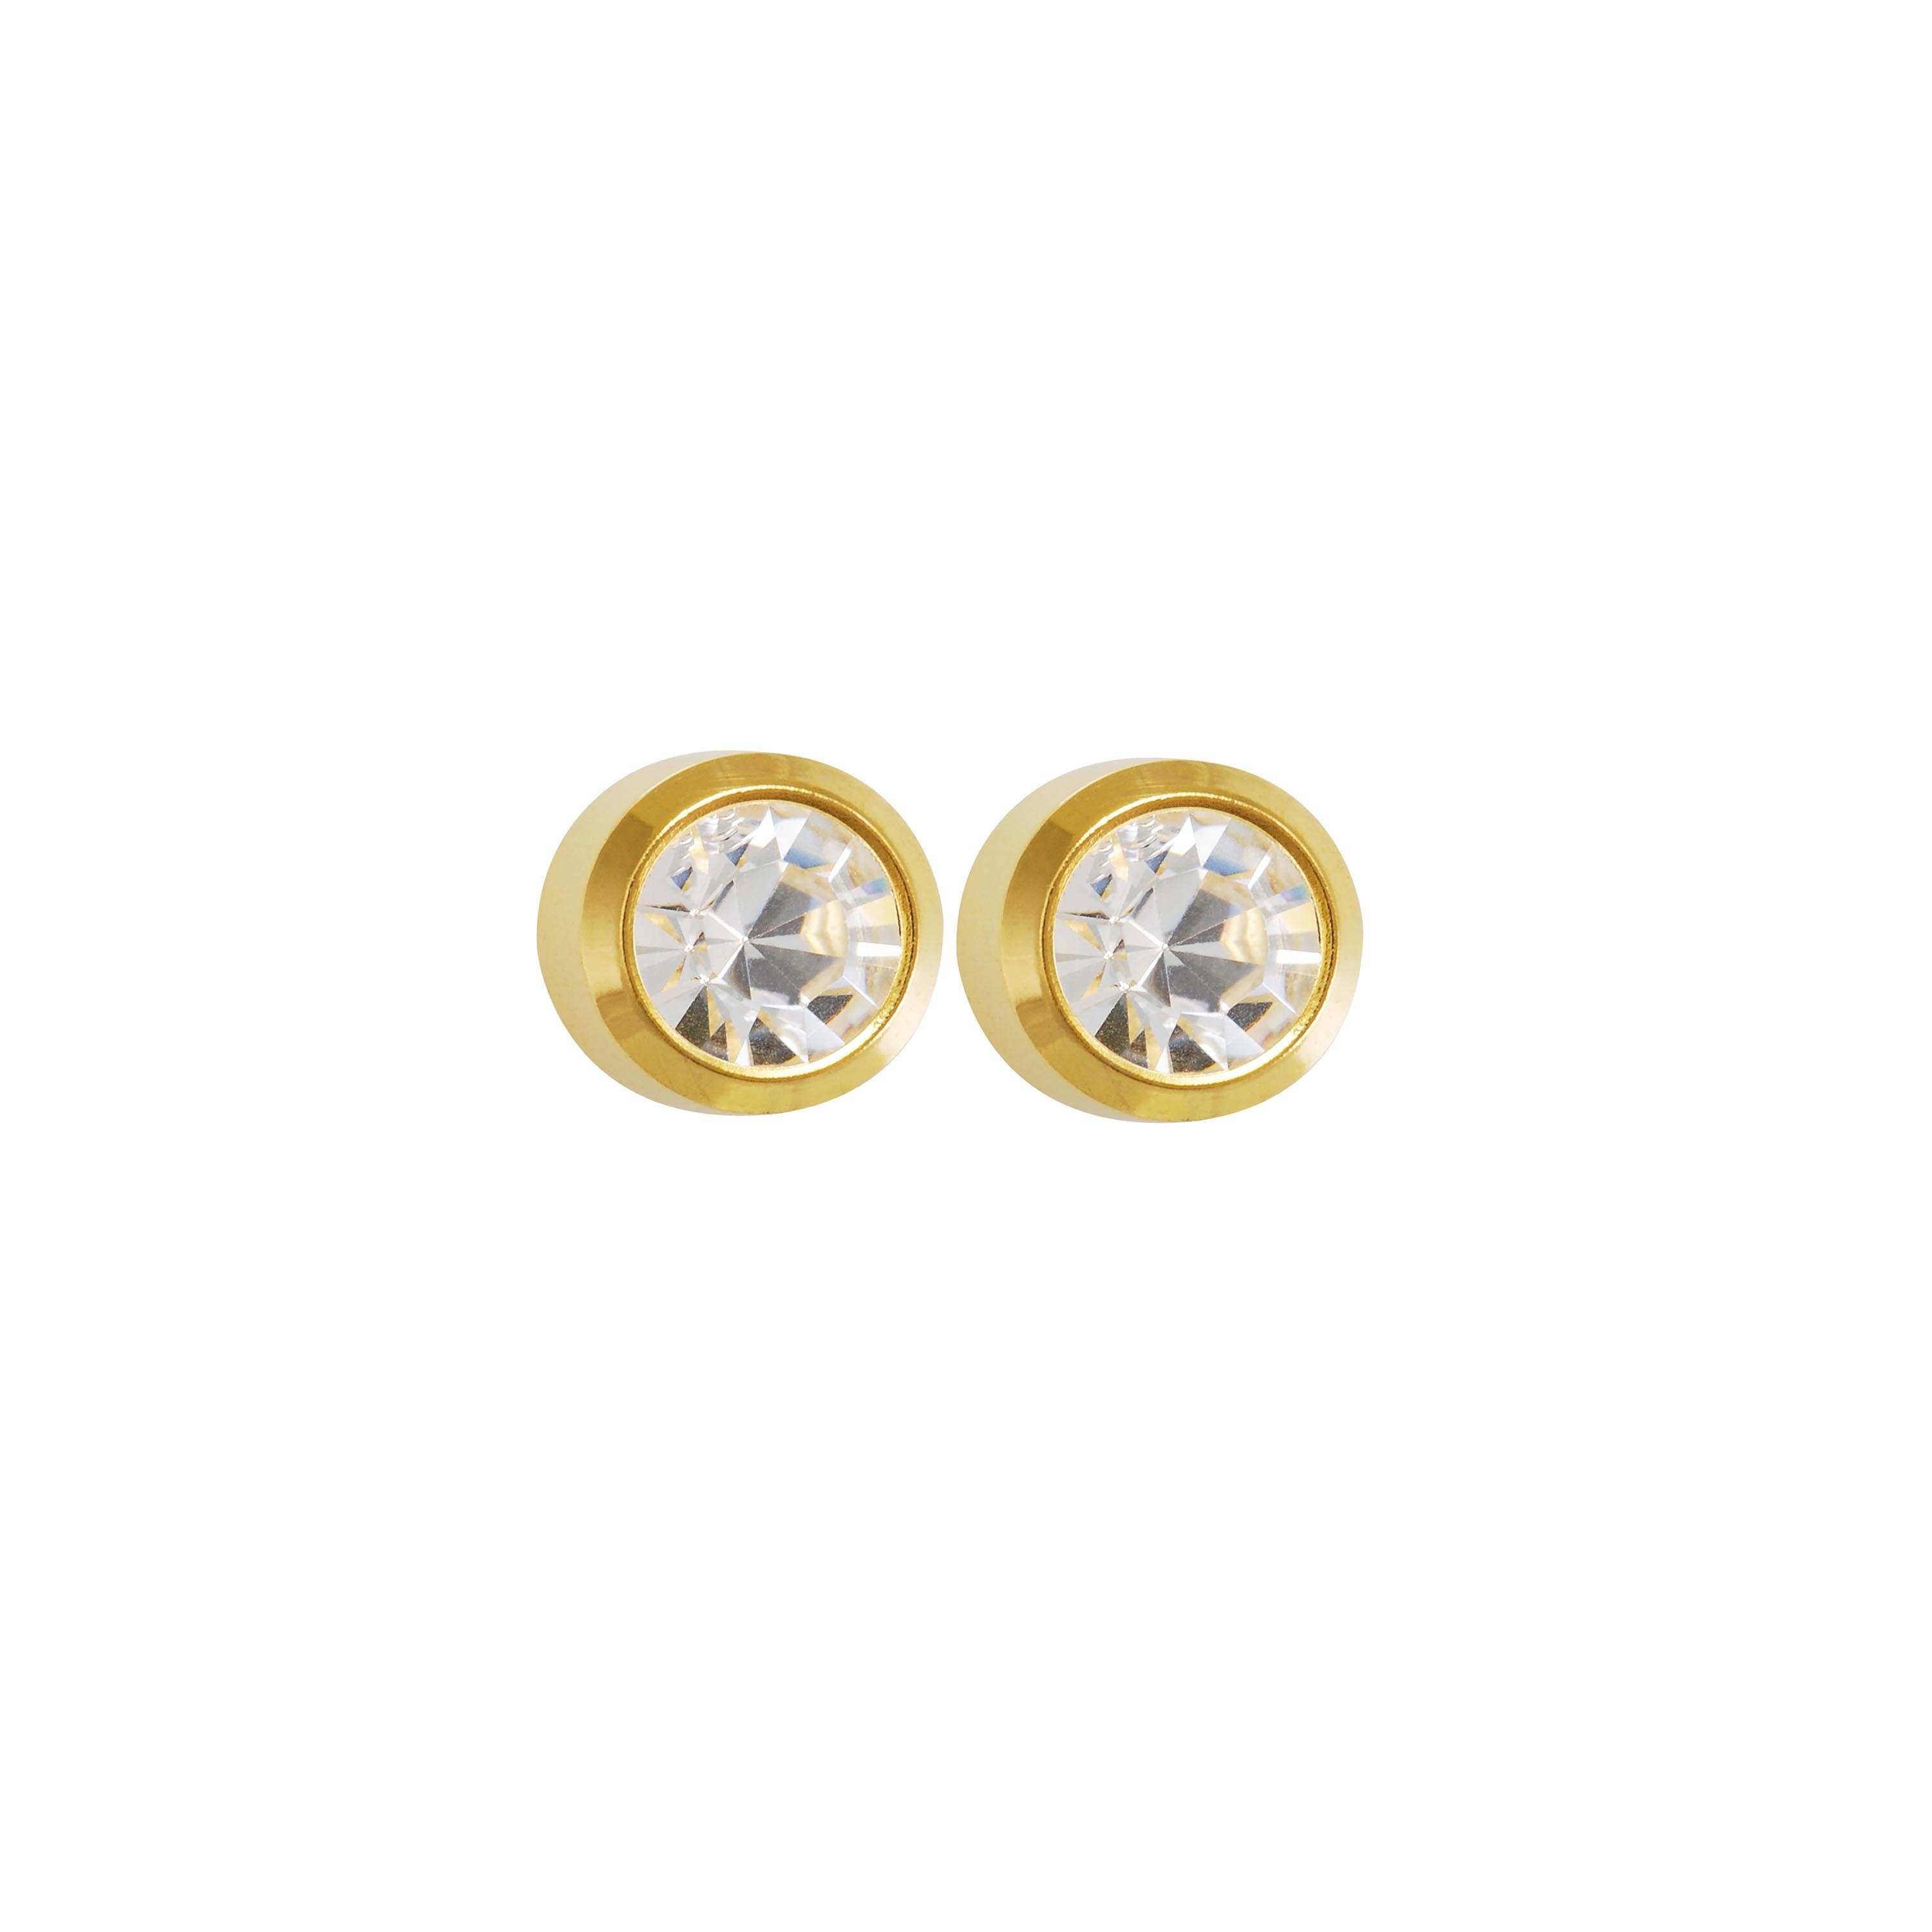 4MM - Bezel - April Crystal | 24K Gold Plated Piercing Ear Studs come Fashion Earrings | Studex Select